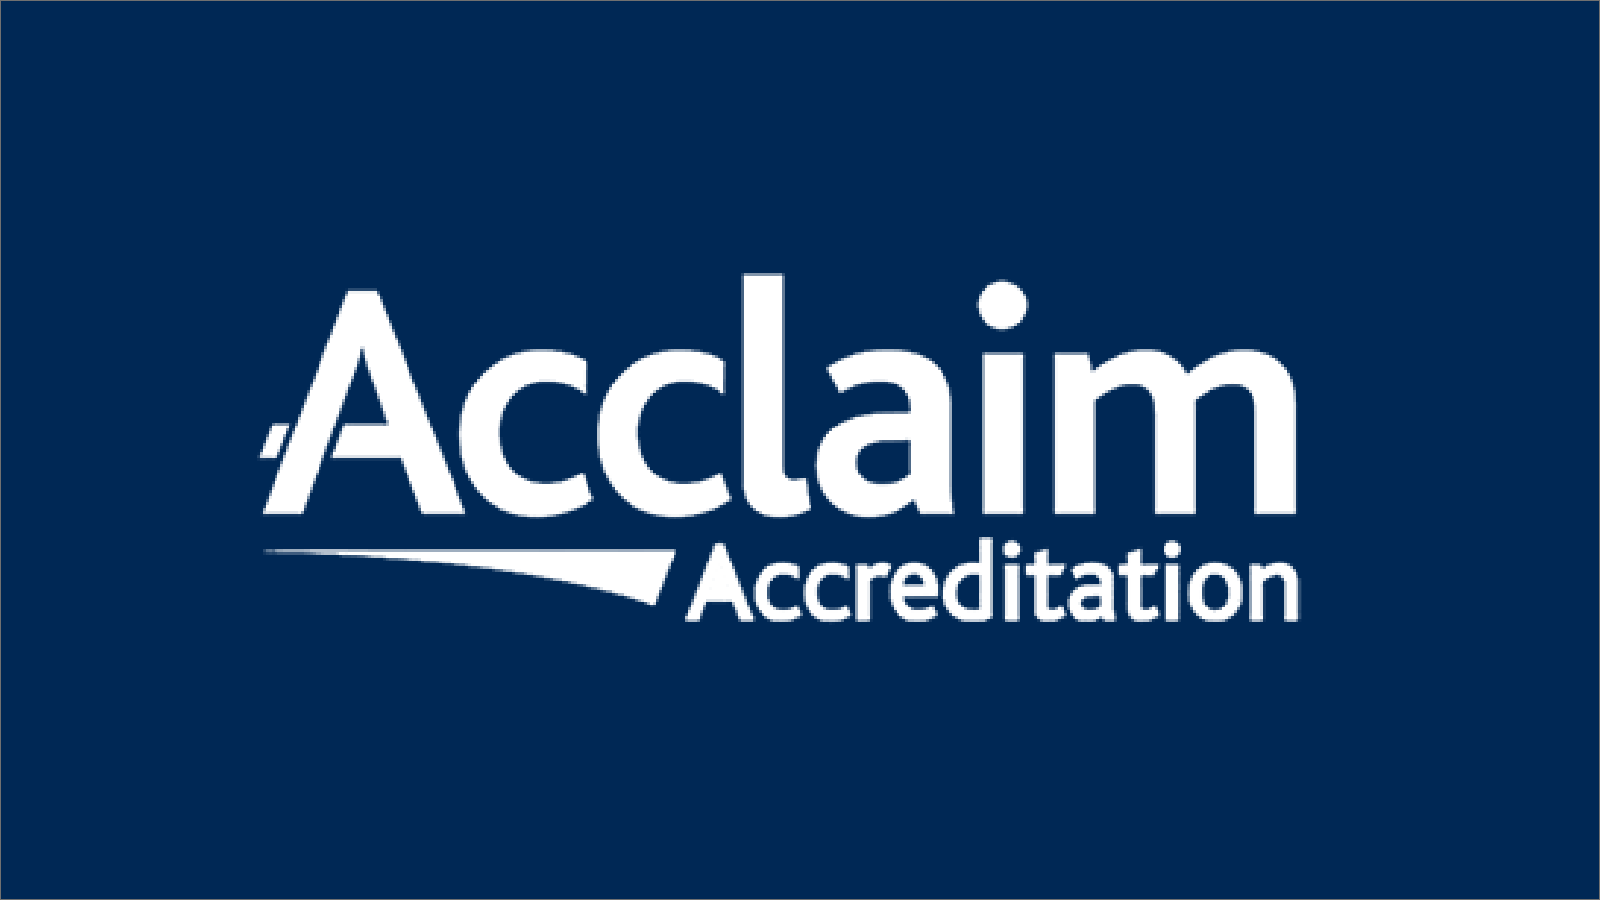 Acclaim accreditation - security solutions